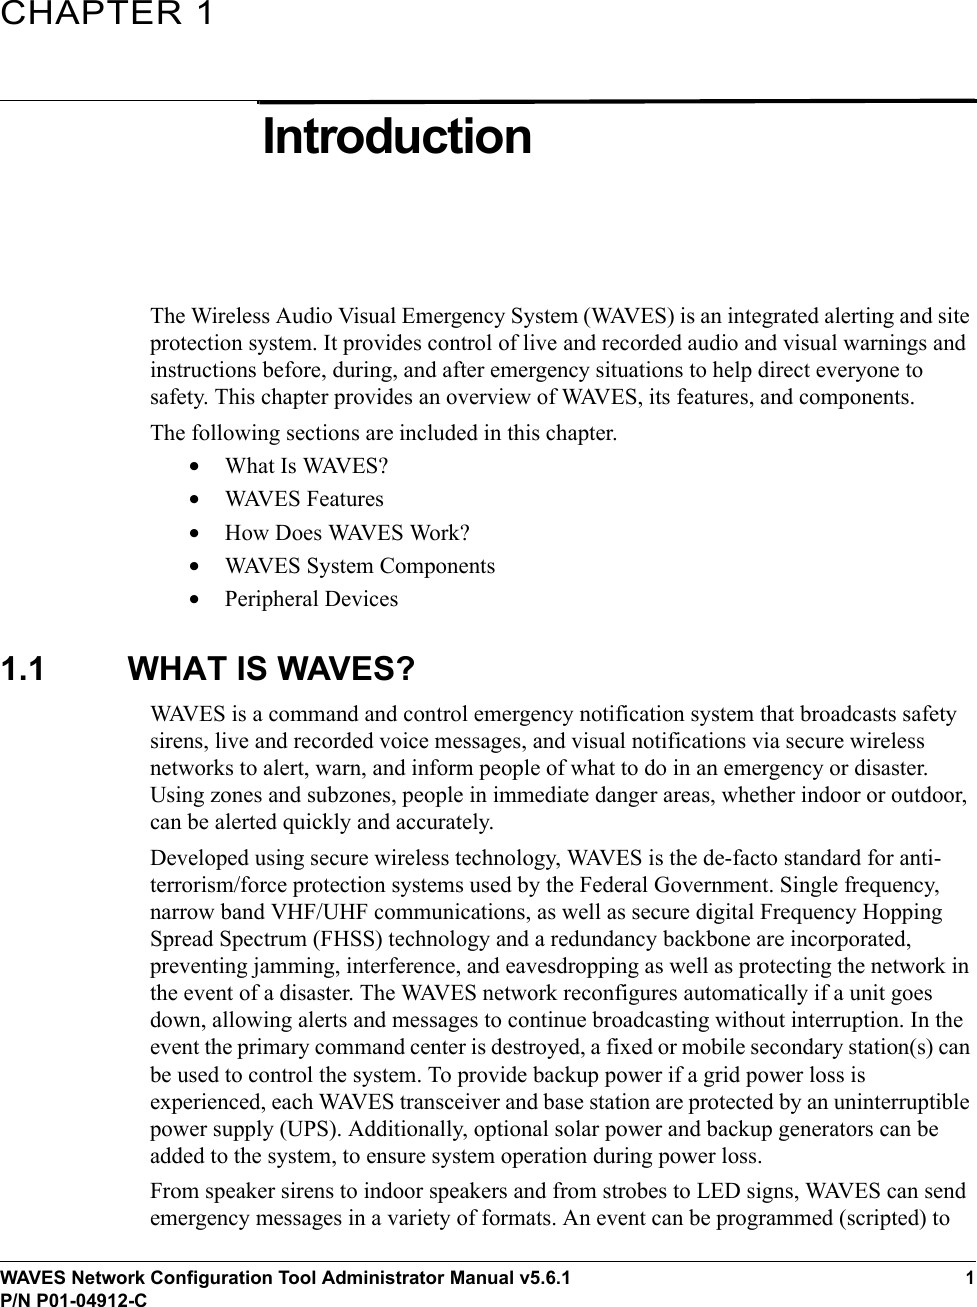 WAVES Network Configuration Tool Administrator Manual v5.6.11P/N P01-04912-CCHAPTER 1IntroductionThe Wireless Audio Visual Emergency System (WAVES) is an integrated alerting and site protection system. It provides control of live and recorded audio and visual warnings and instructions before, during, and after emergency situations to help direct everyone to safety. This chapter provides an overview of WAVES, its features, and components.The following sections are included in this chapter.•What Is WAVES?•WAVES Features•How Does WAVES Work?•WAVES System Components•Peripheral Devices1.1 WHAT IS WAVES?WAVES is a command and control emergency notification system that broadcasts safety sirens, live and recorded voice messages, and visual notifications via secure wireless networks to alert, warn, and inform people of what to do in an emergency or disaster. Using zones and subzones, people in immediate danger areas, whether indoor or outdoor, can be alerted quickly and accurately.Developed using secure wireless technology, WAVES is the de-facto standard for anti-terrorism/force protection systems used by the Federal Government. Single frequency, narrow band VHF/UHF communications, as well as secure digital Frequency Hopping Spread Spectrum (FHSS) technology and a redundancy backbone are incorporated, preventing jamming, interference, and eavesdropping as well as protecting the network in the event of a disaster. The WAVES network reconfigures automatically if a unit goes down, allowing alerts and messages to continue broadcasting without interruption. In the event the primary command center is destroyed, a fixed or mobile secondary station(s) can be used to control the system. To provide backup power if a grid power loss is experienced, each WAVES transceiver and base station are protected by an uninterruptible power supply (UPS). Additionally, optional solar power and backup generators can be added to the system, to ensure system operation during power loss.From speaker sirens to indoor speakers and from strobes to LED signs, WAVES can send emergency messages in a variety of formats. An event can be programmed (scripted) to 